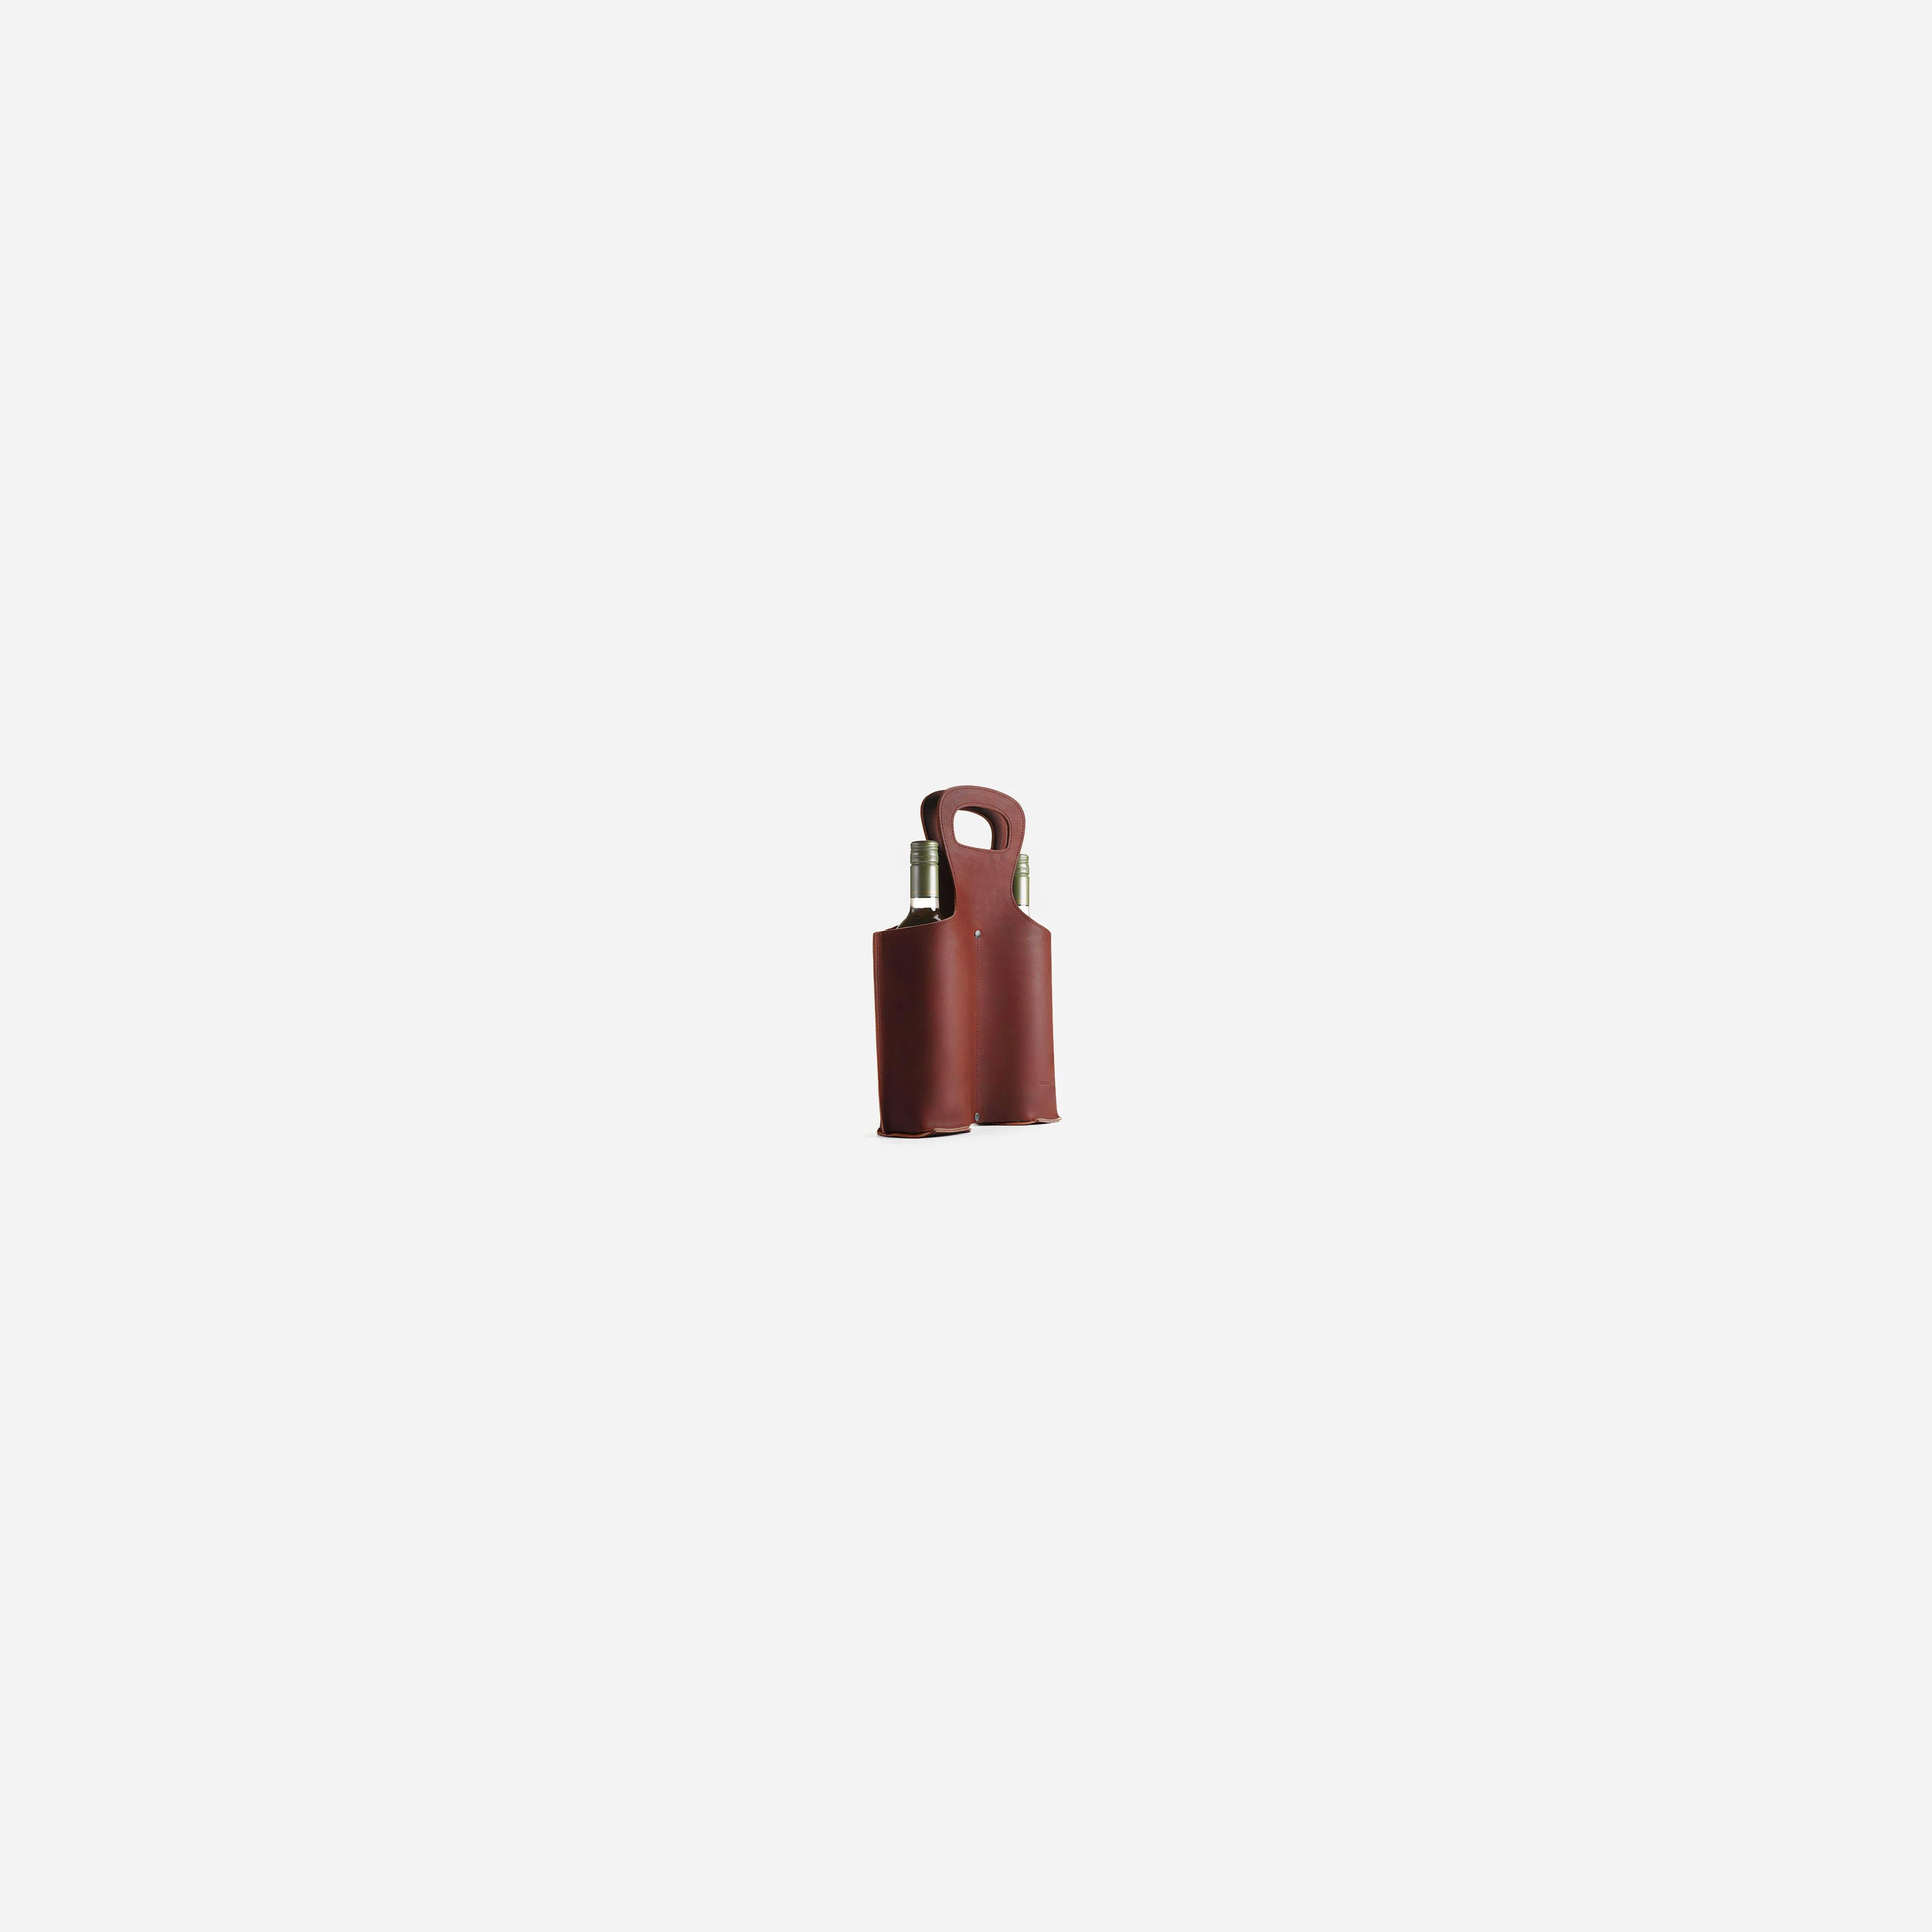 No. 566 Double Leather Wine Tote